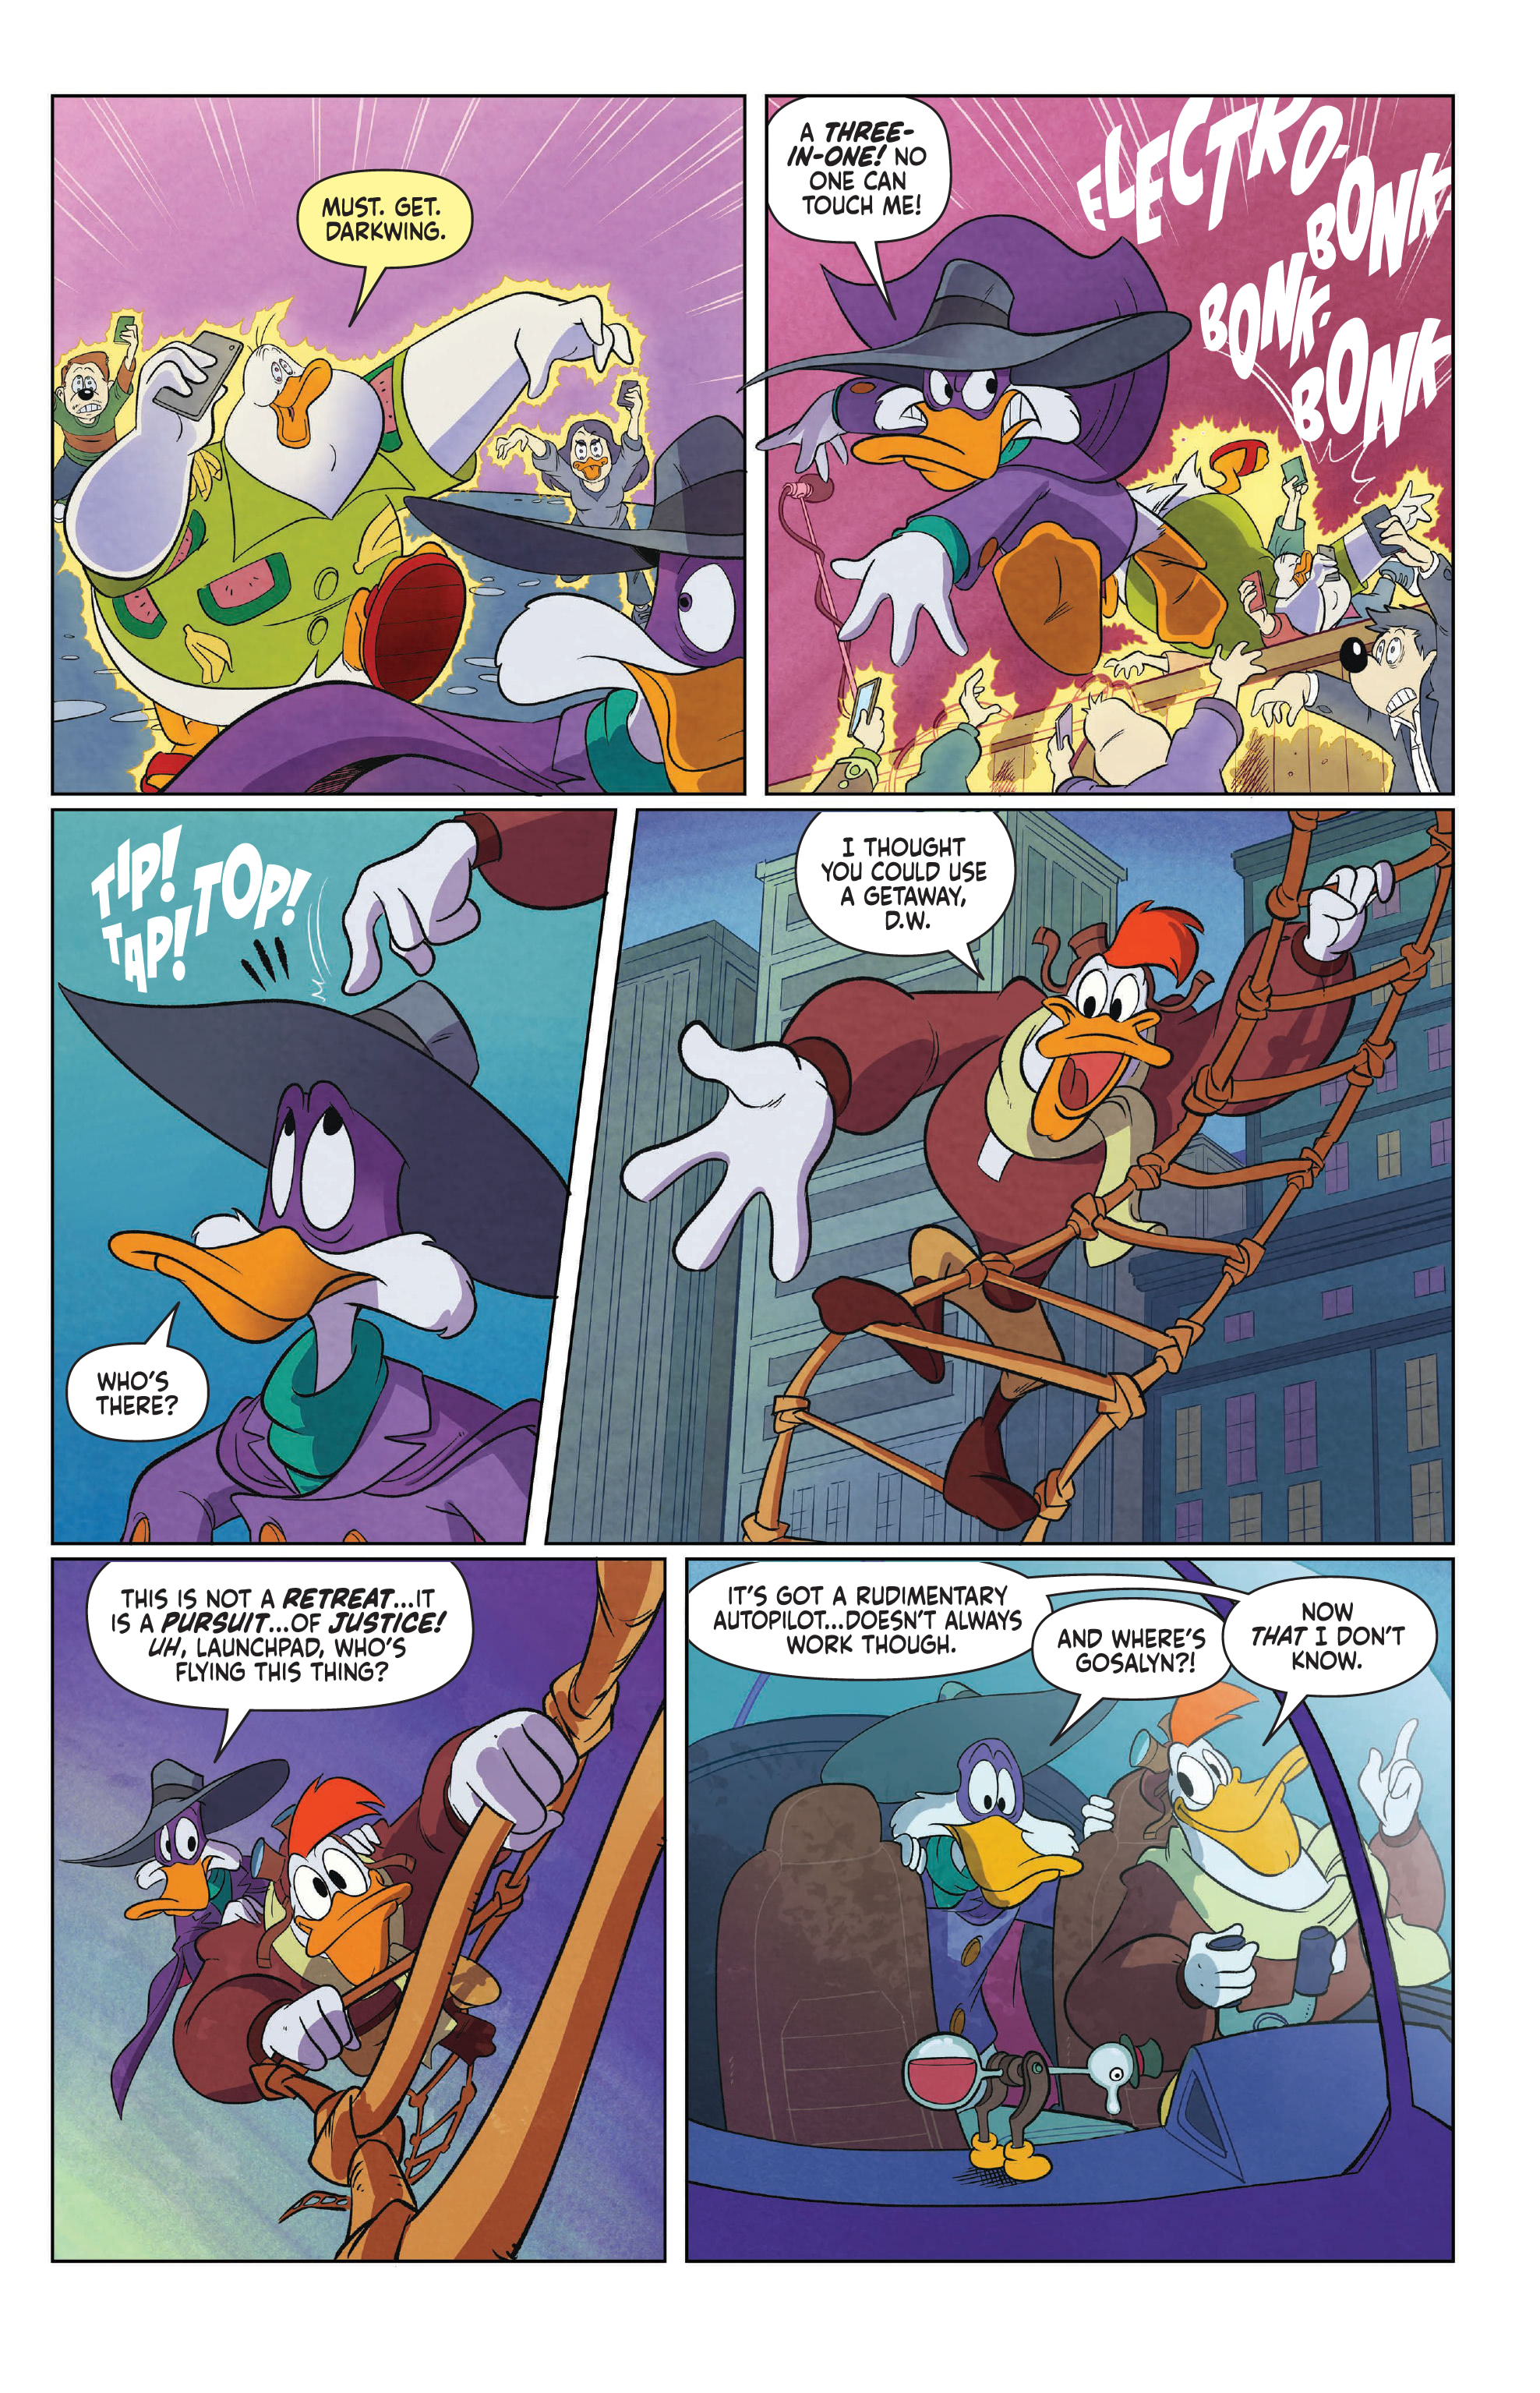 Darkwing Duck 2023 Chapter 1 Page 1